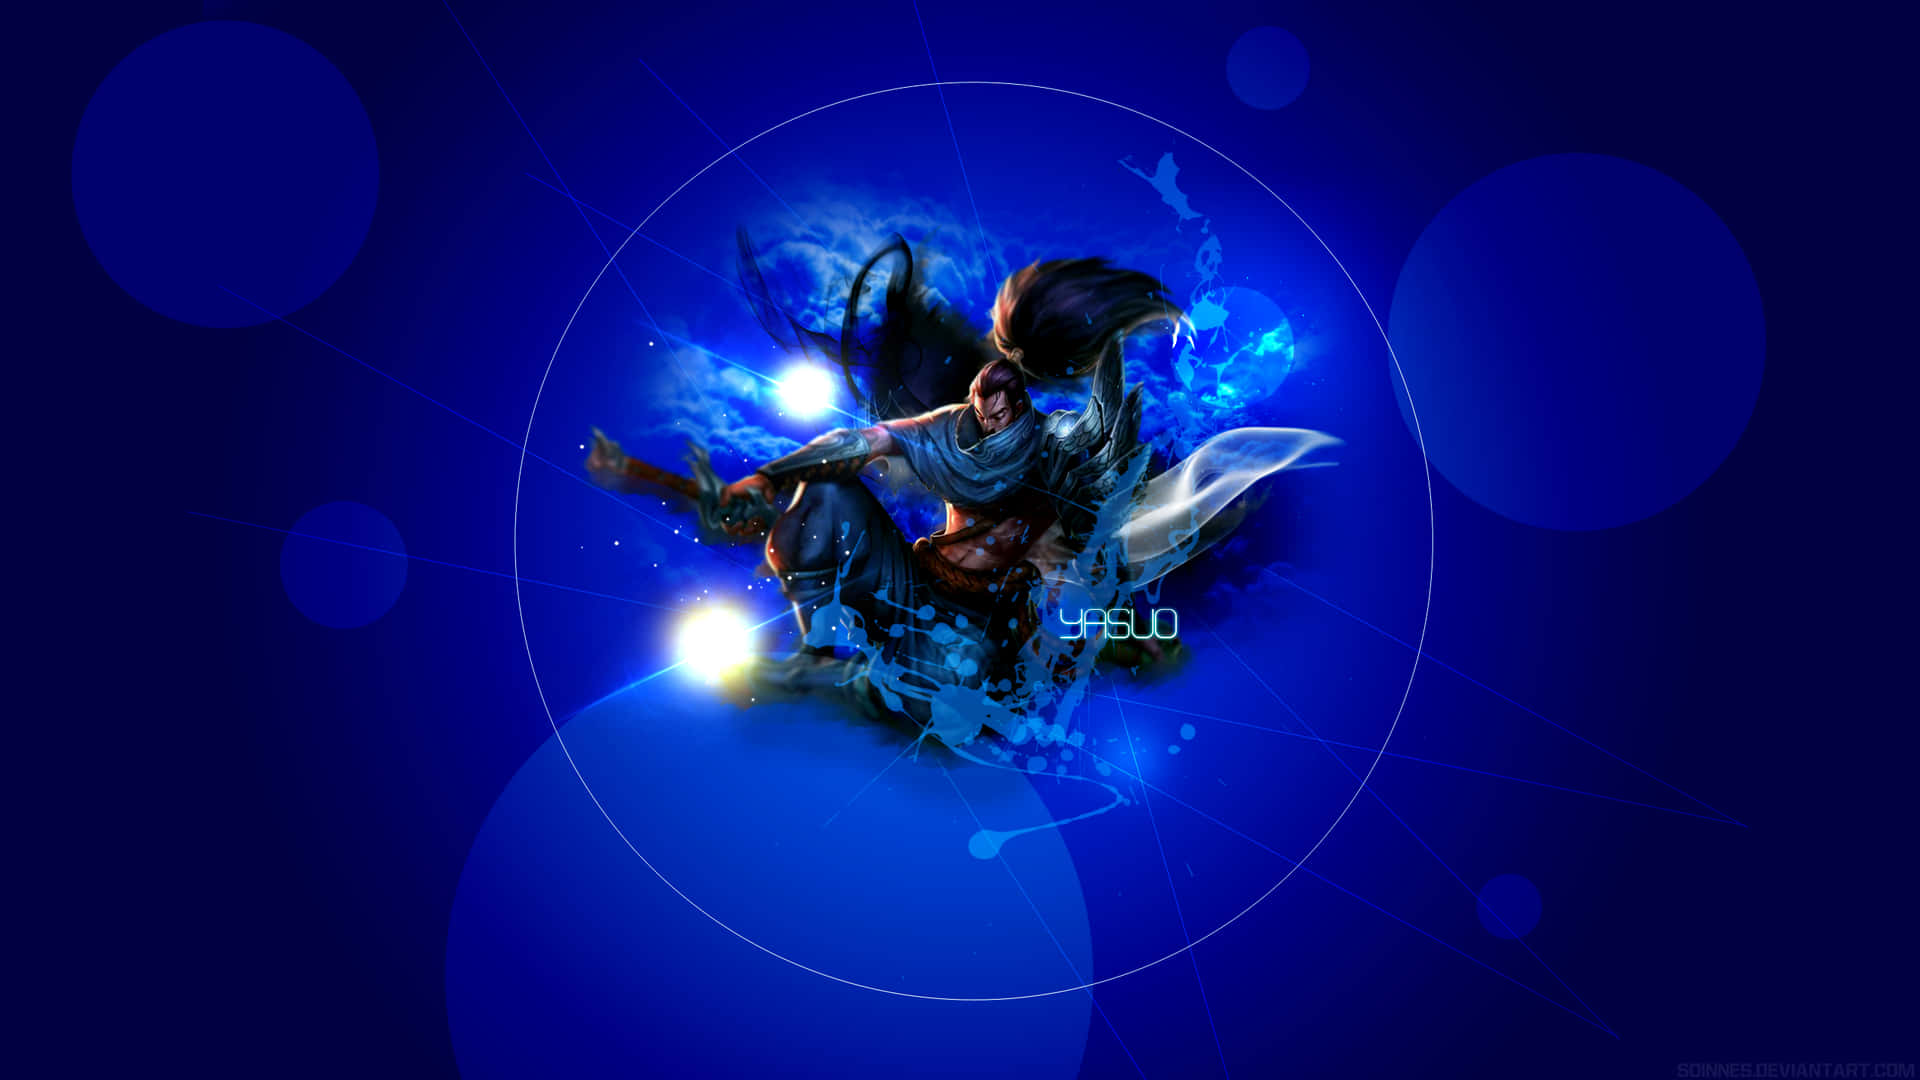 Do you dare challenge the great Yasuo? Wallpaper